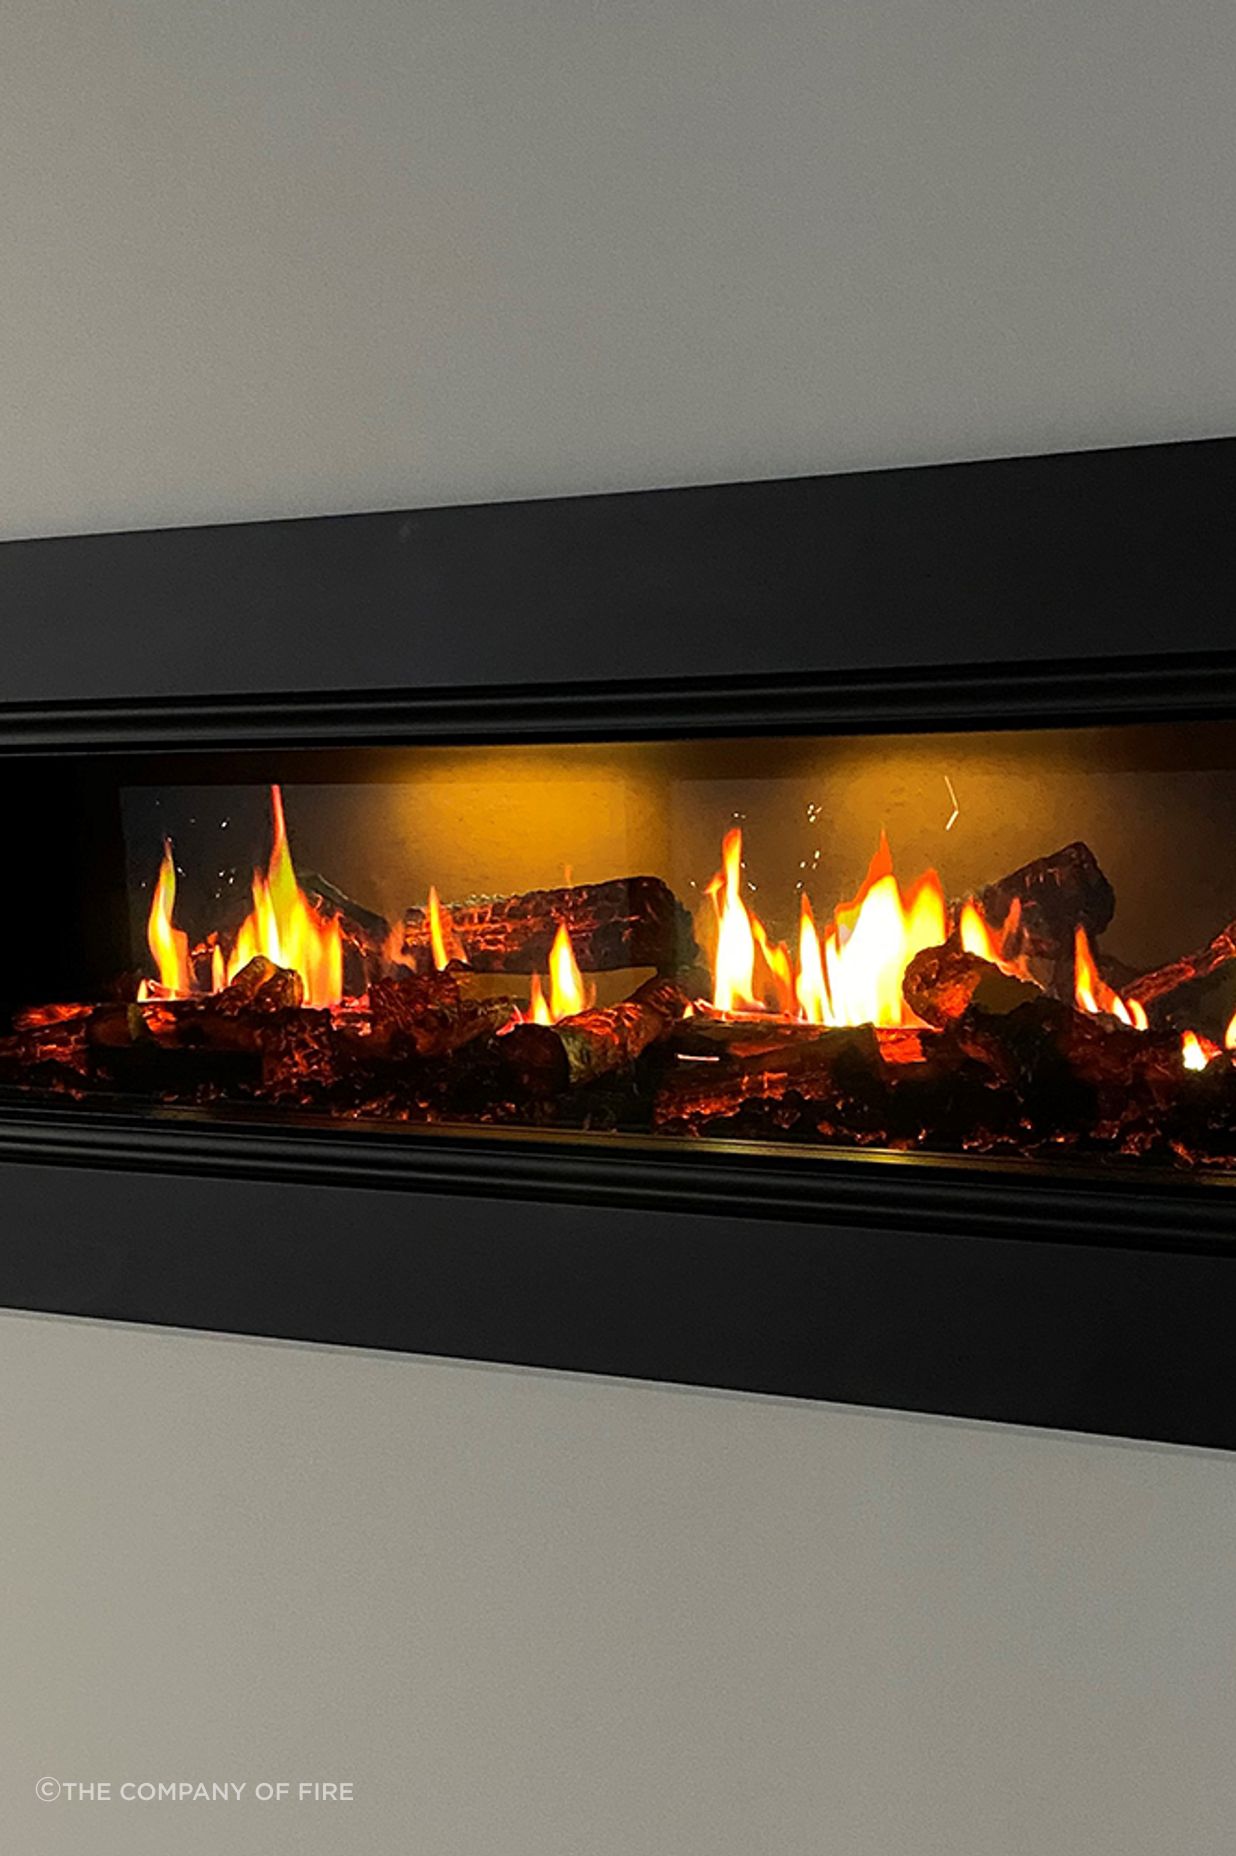 The Real Flame Opti-V Electric Fireplace can easily replicate the appearance of a natural flame.